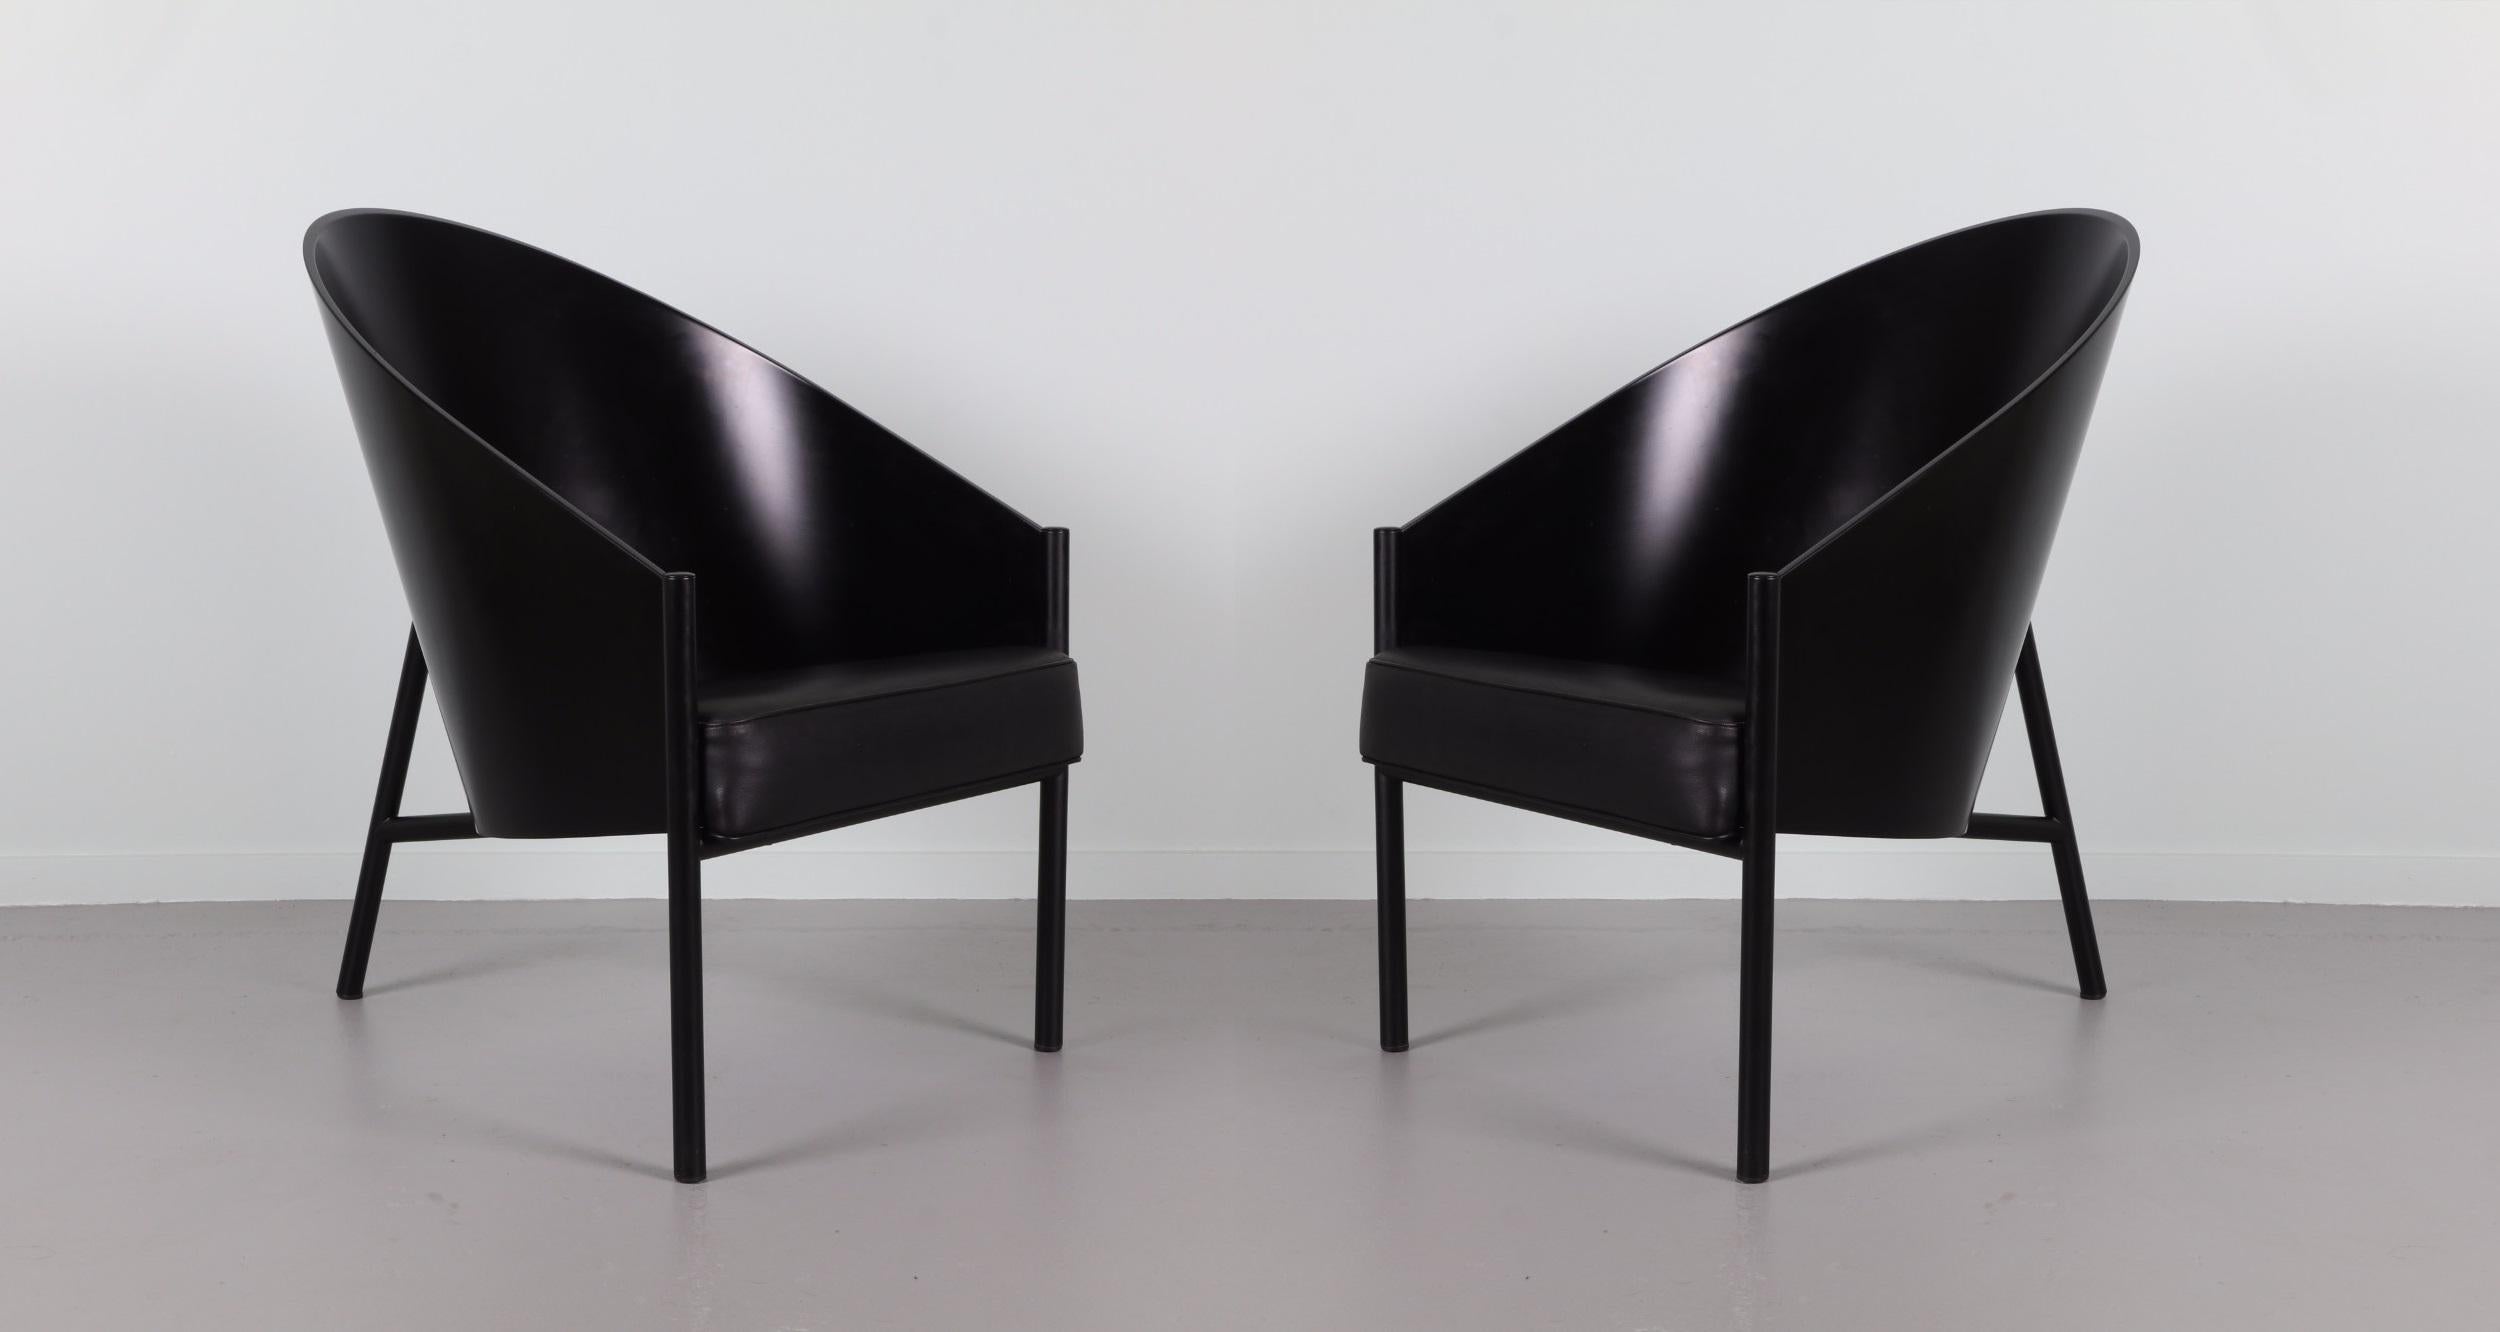 Pair iconic Pratfall lounge or easy chairs designed by Starck, circa 1982. The distinctive three-legged chair slightly larger, deeply comfortable wraps the sitter in a curve of black-lacquered beech. The chairs have a black metal tubular frame with